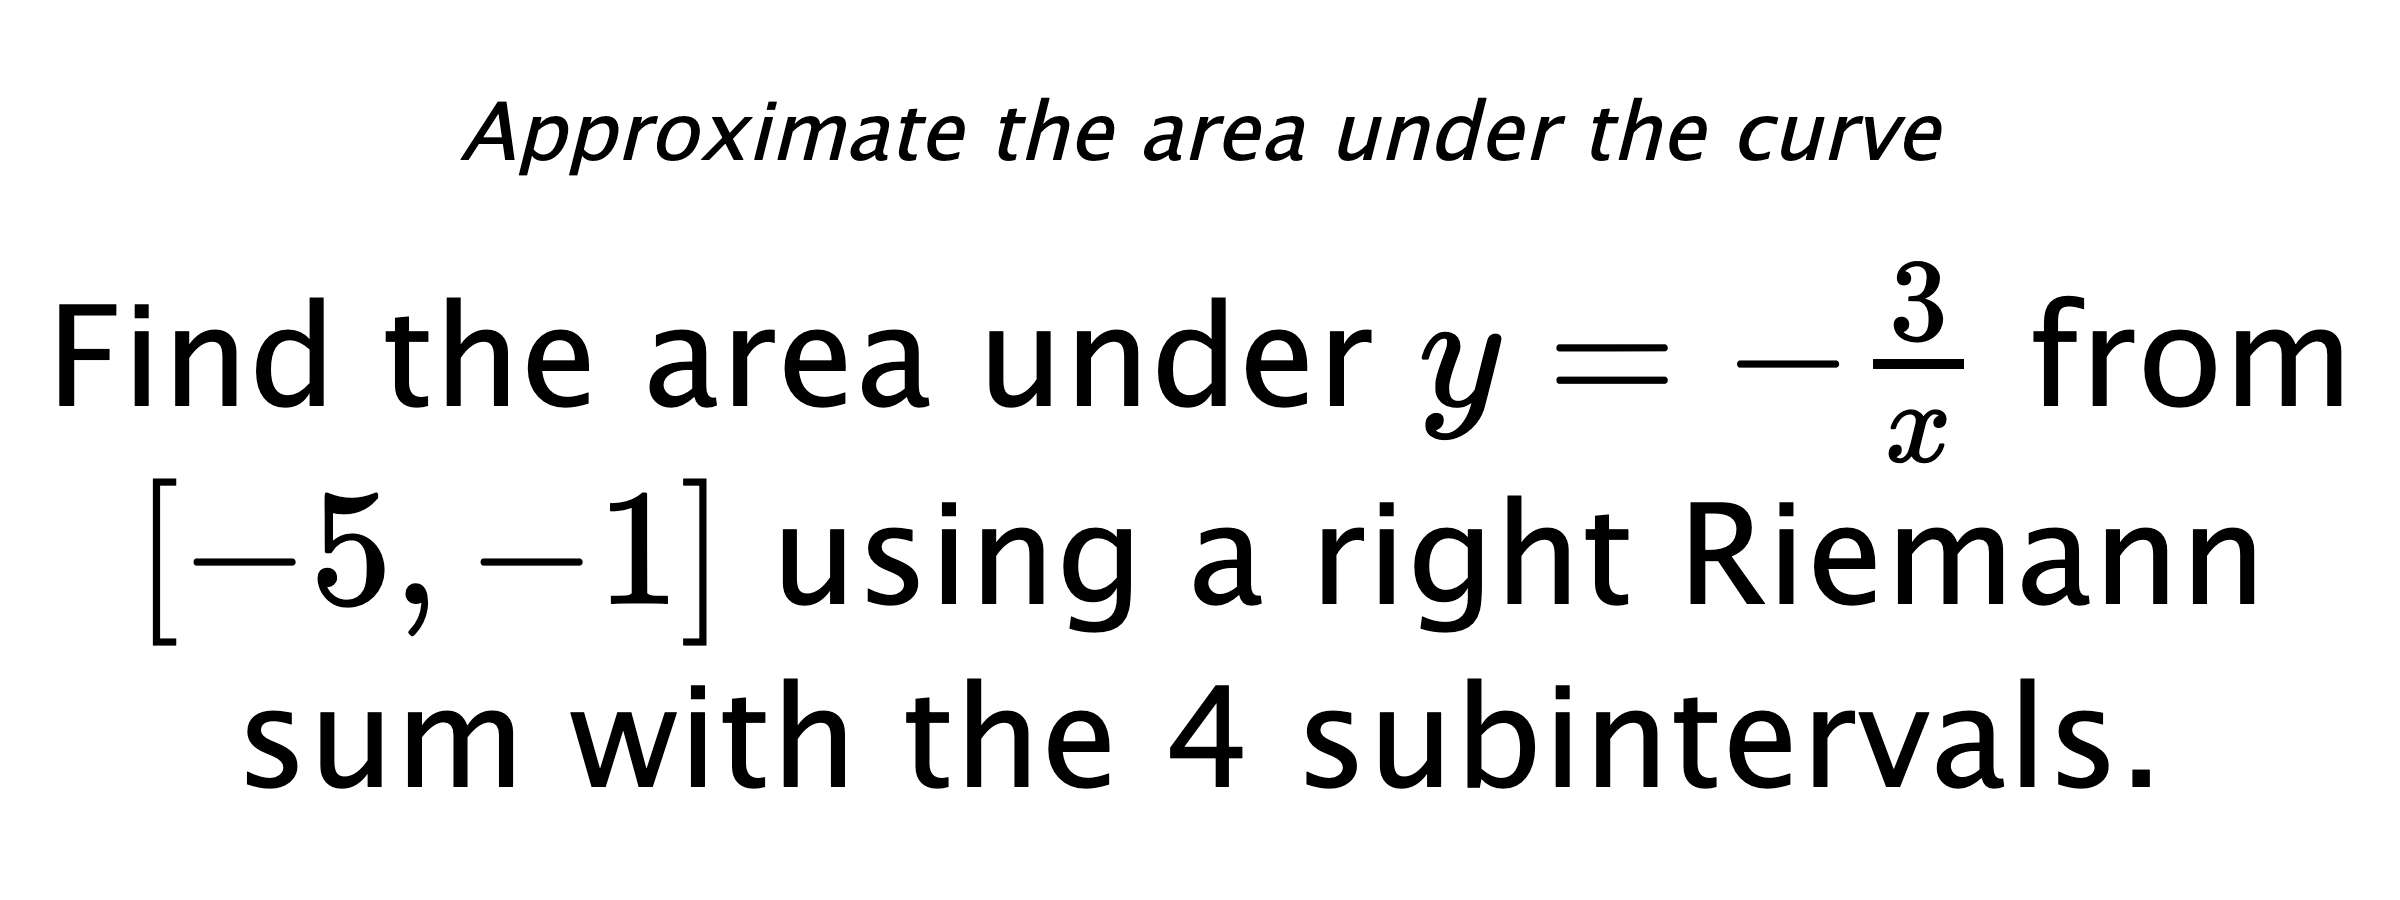 Approximate the area under the curve Find the area under $ y=-\frac{3}{x} $ from $ [-5,-1] $ using a right Riemann sum with the 4 subintervals.